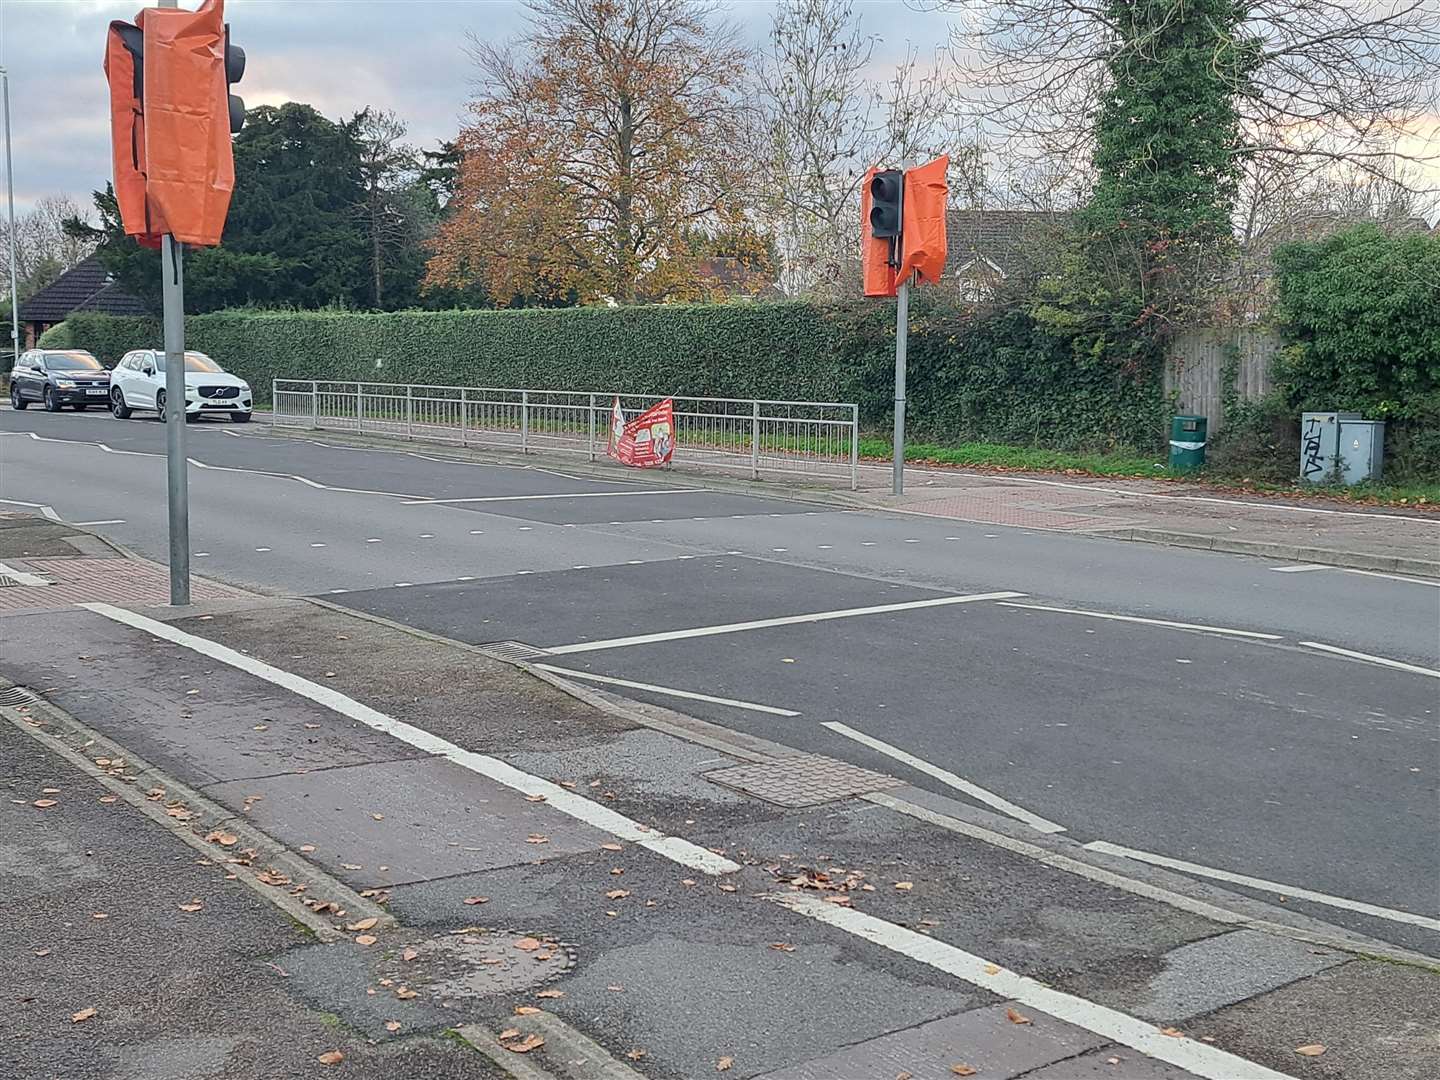 The vandalised pelican crossing in Shipbourne Road is now out of order